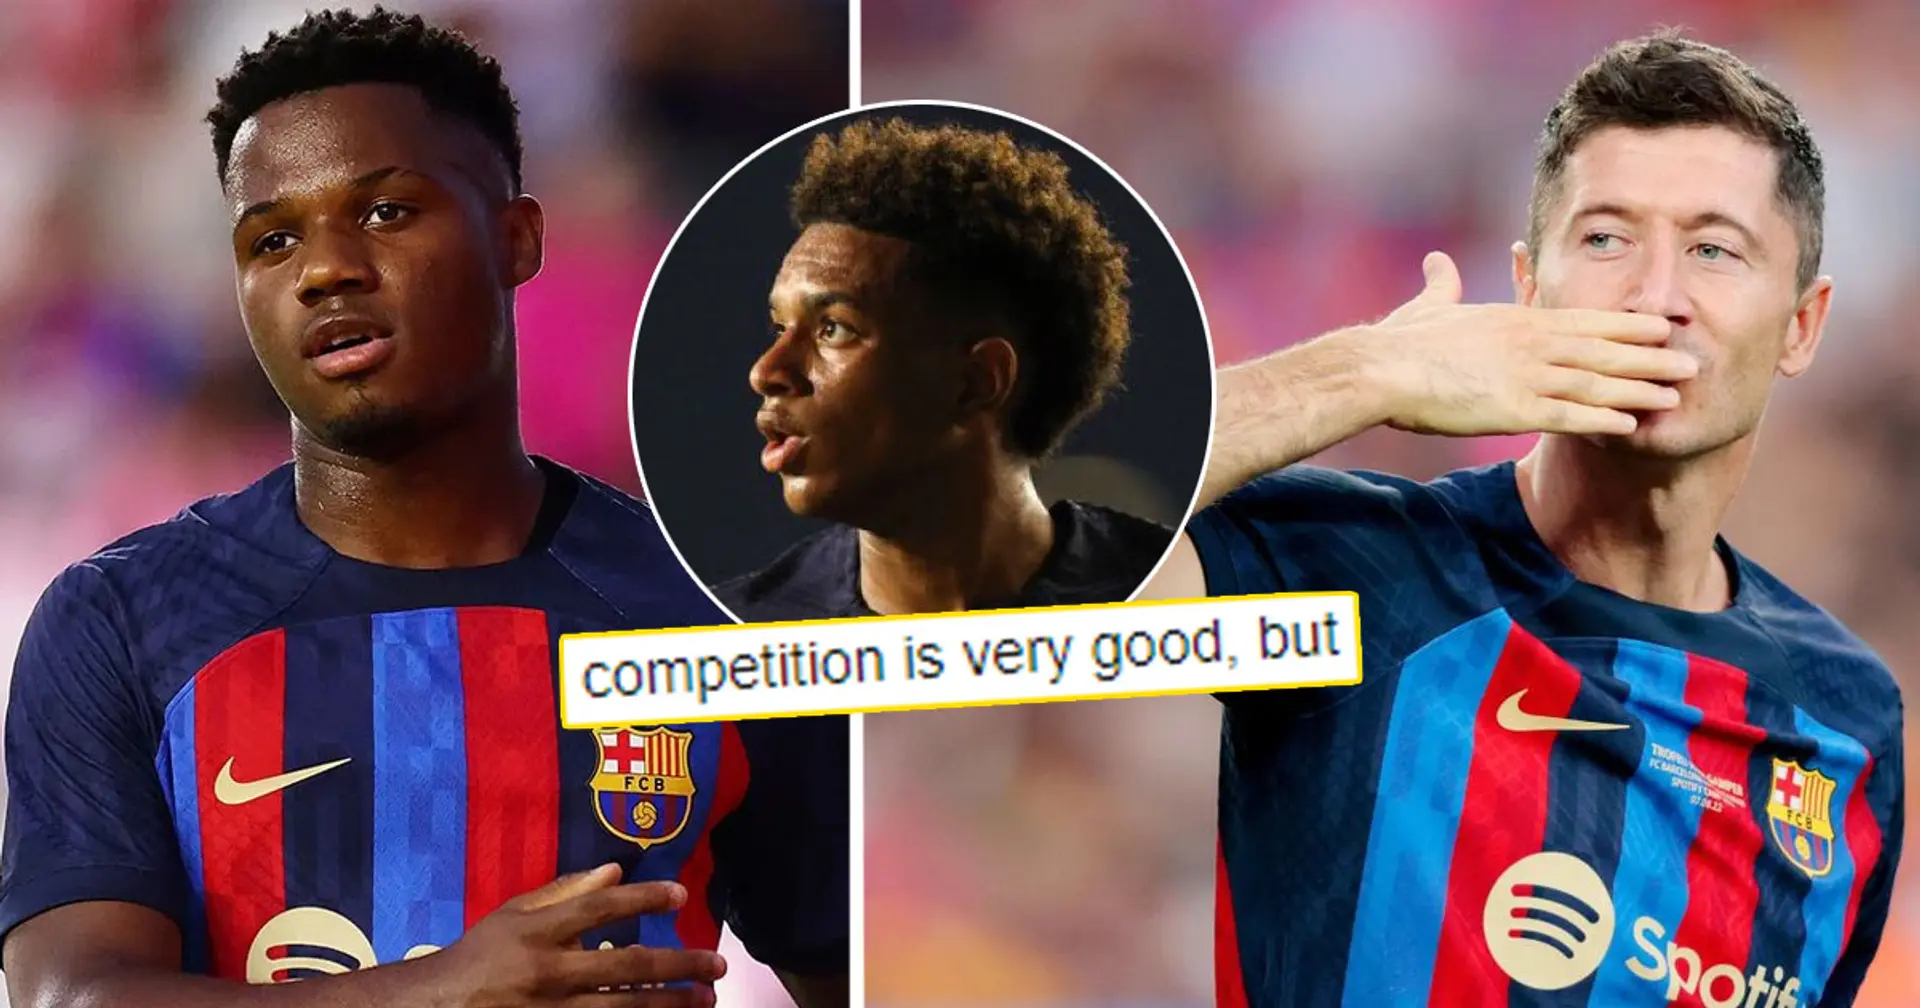 Fan names one 'dark point' about Barca's otherwise exciting pre-season